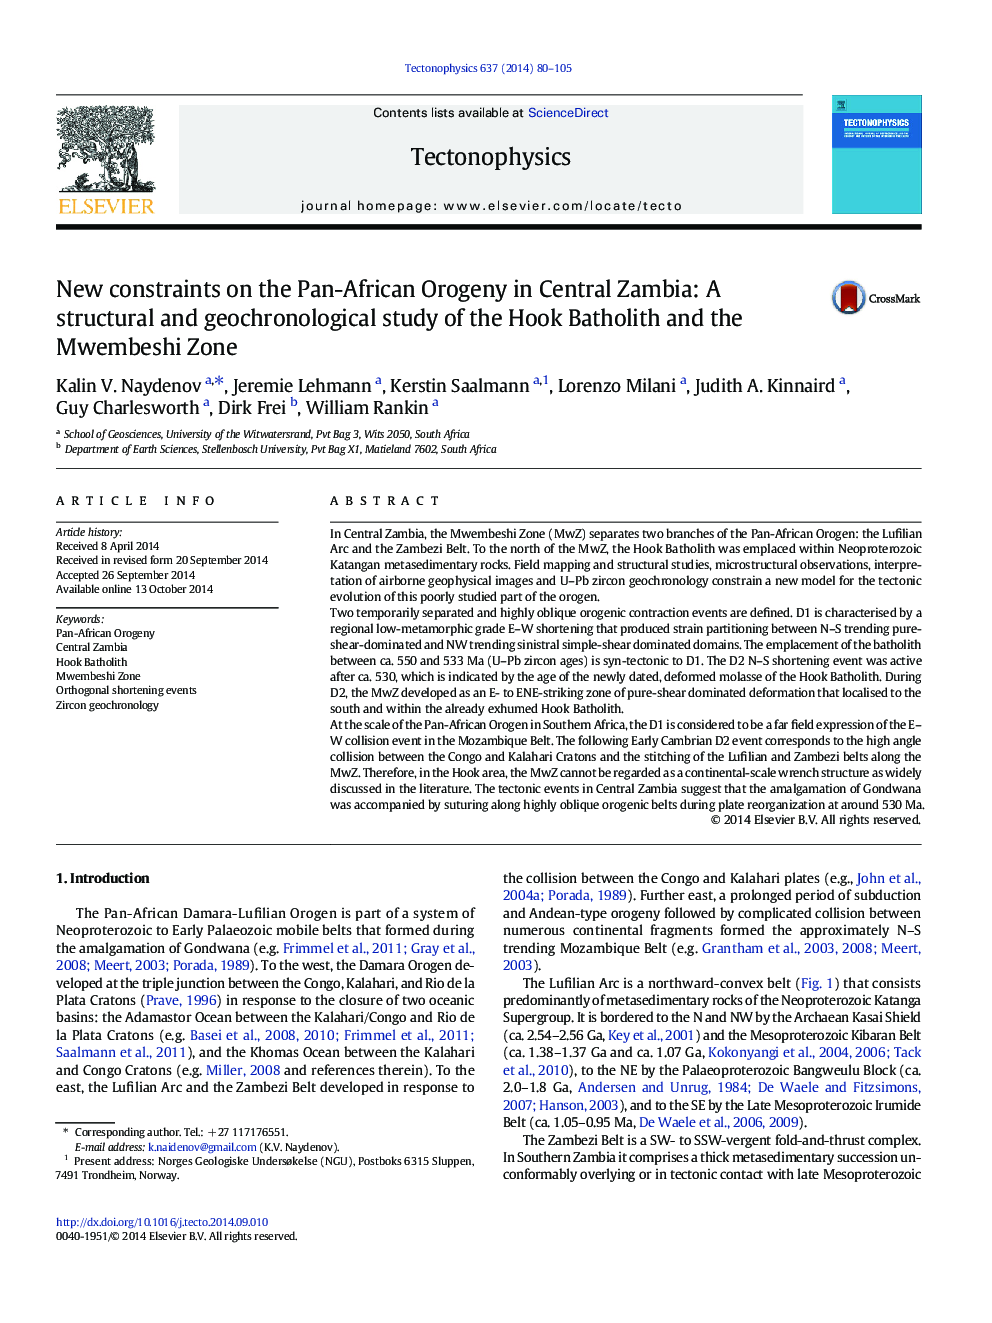 New constraints on the Pan-African Orogeny in Central Zambia: A structural and geochronological study of the Hook Batholith and the Mwembeshi Zone